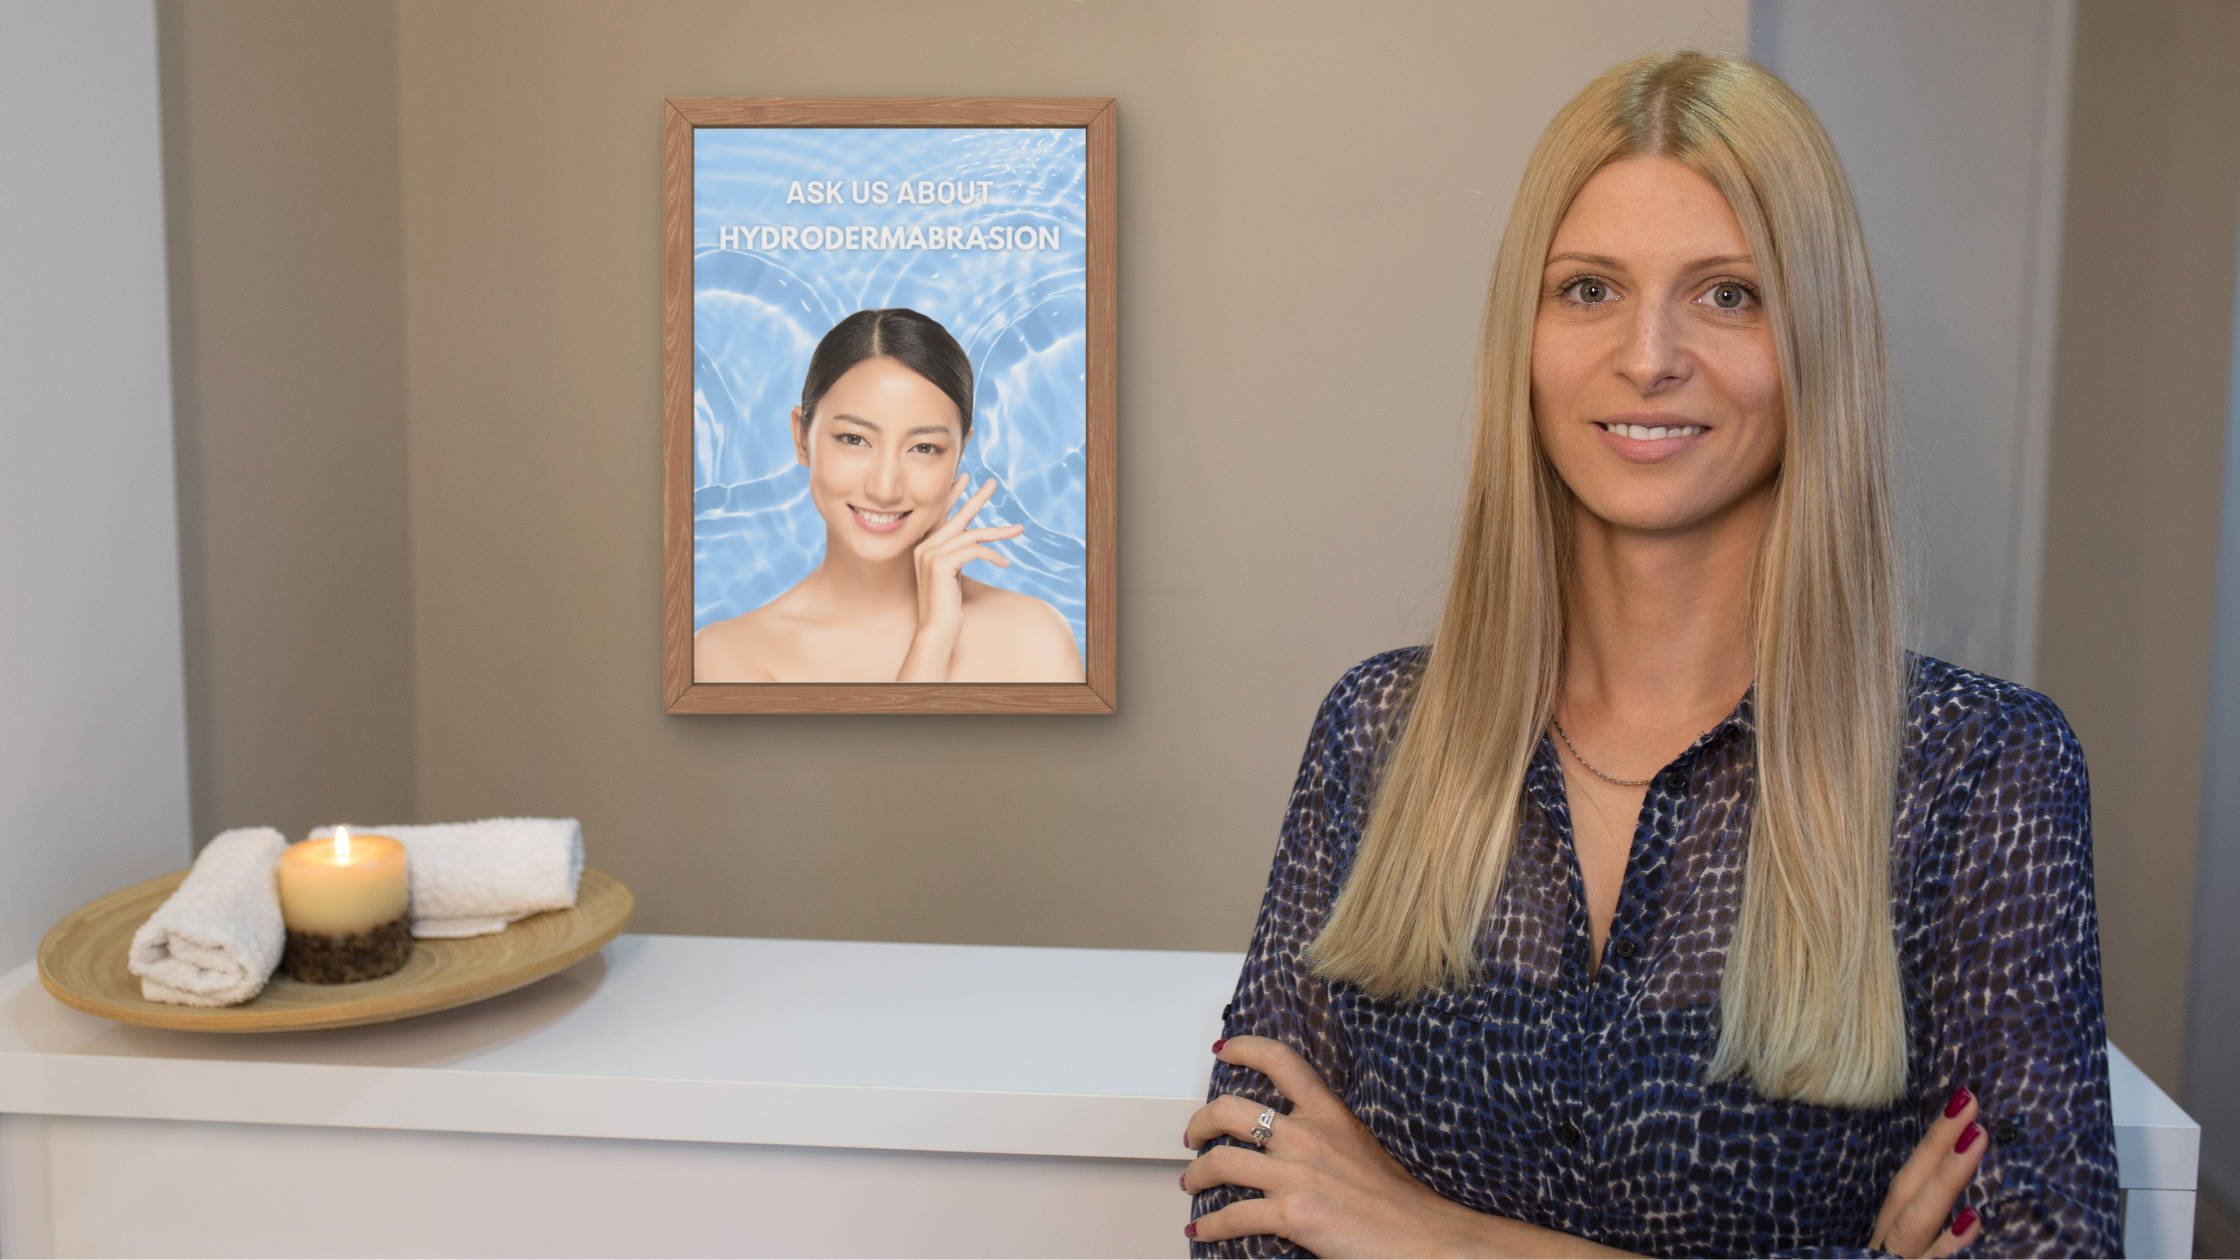 Increase Spa Revenue: Hydradermabrasion for Profitable Growth